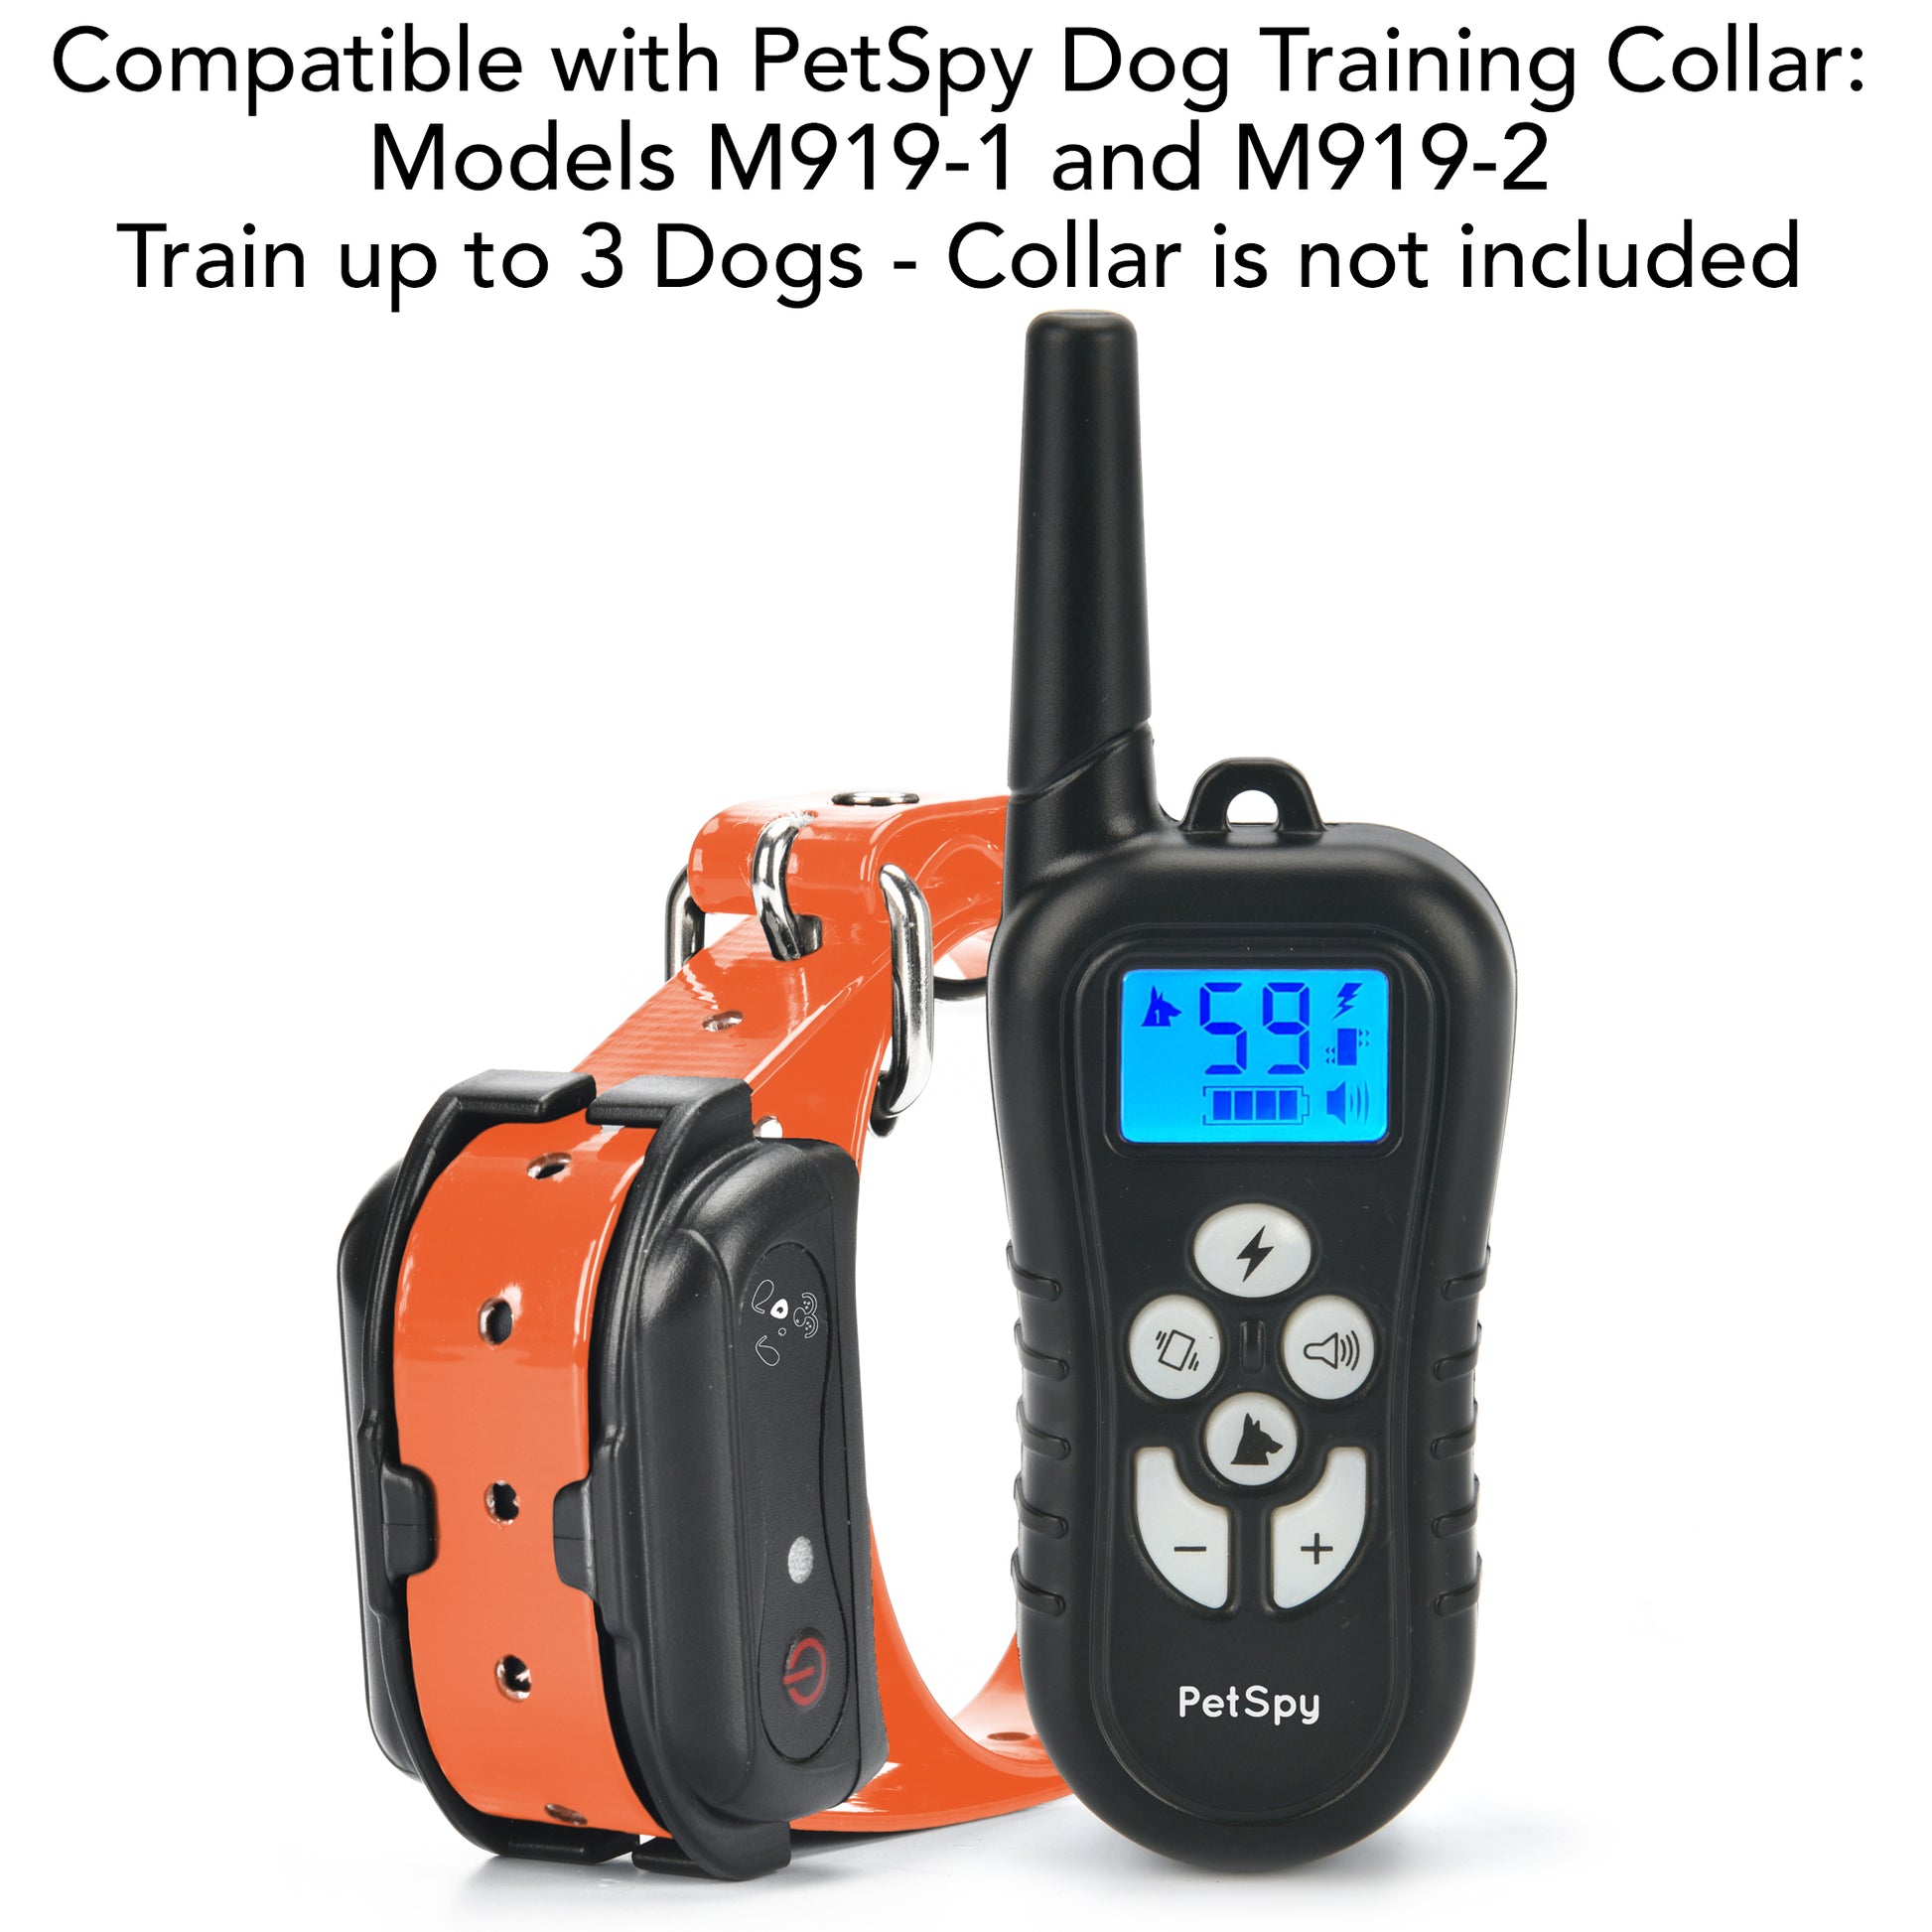 m919_compatible with petspy dog training collar_model M919-1 and M919-2 